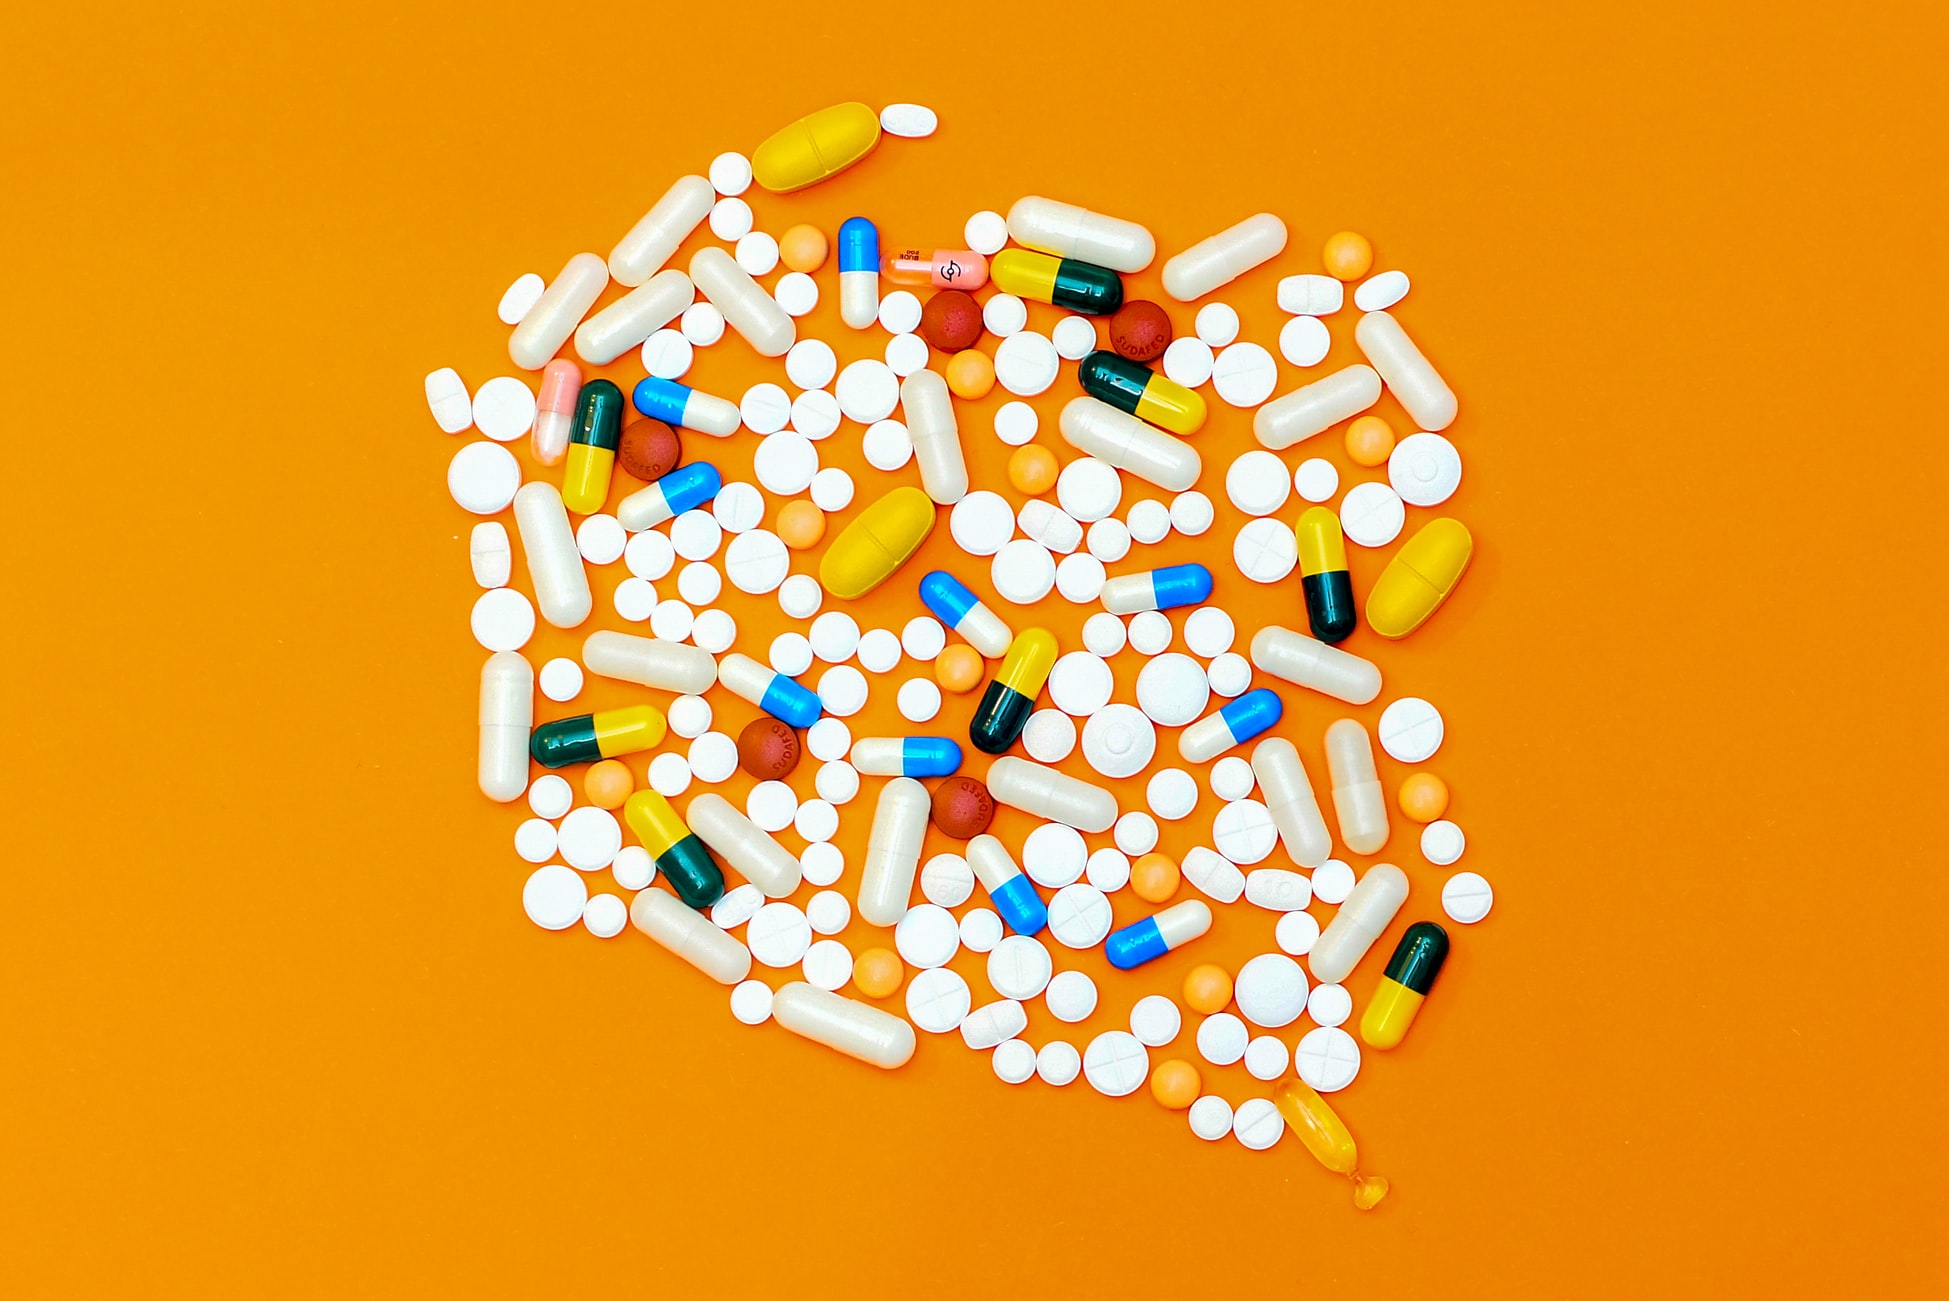 Medications on a table